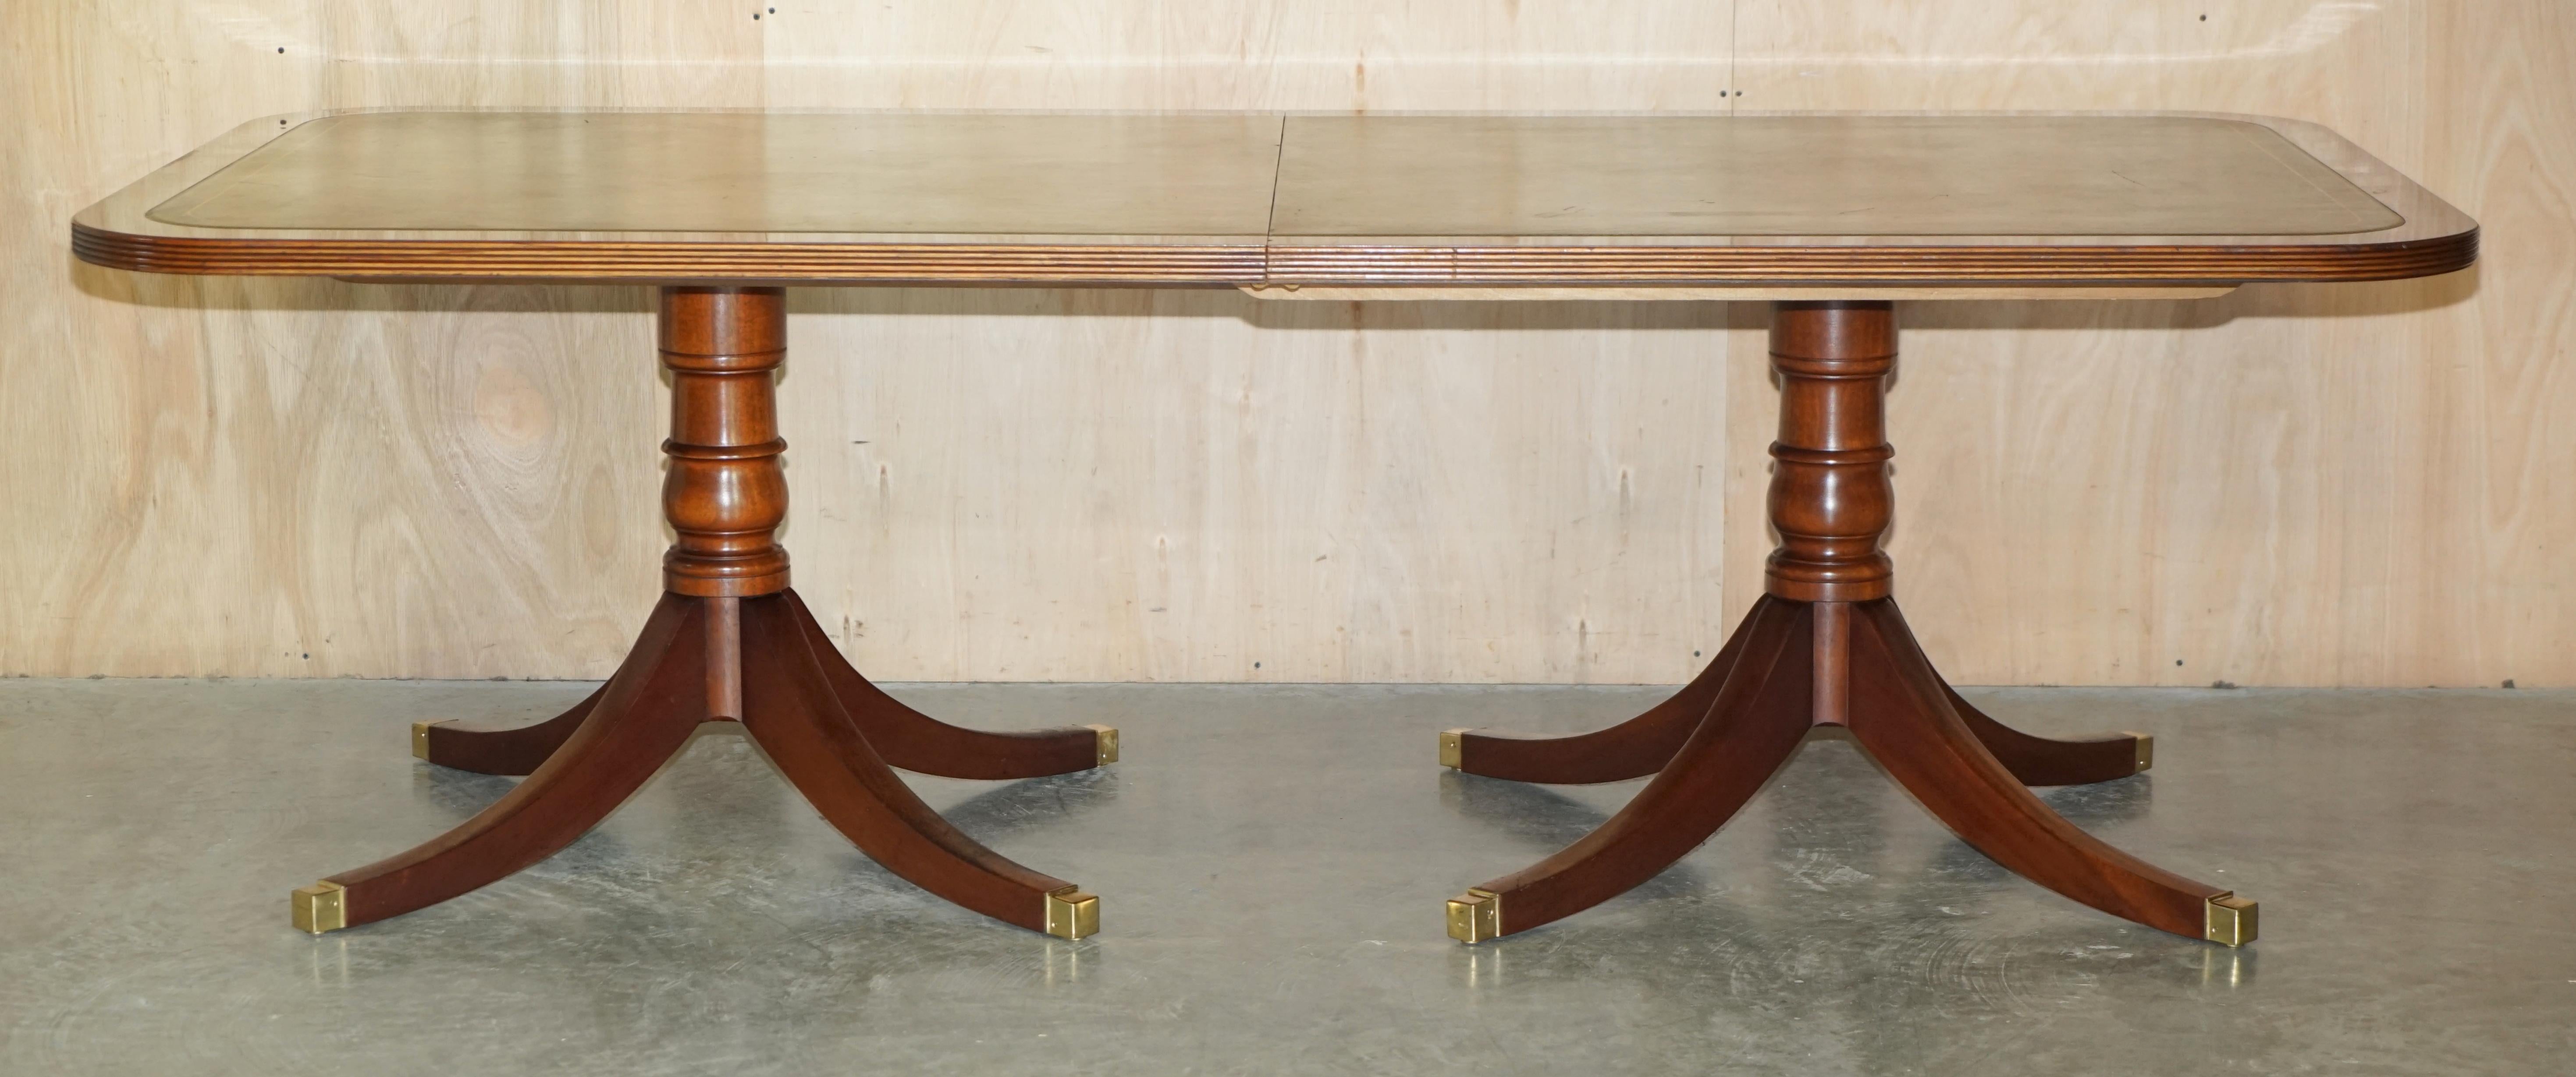 extendable dining table seats 12